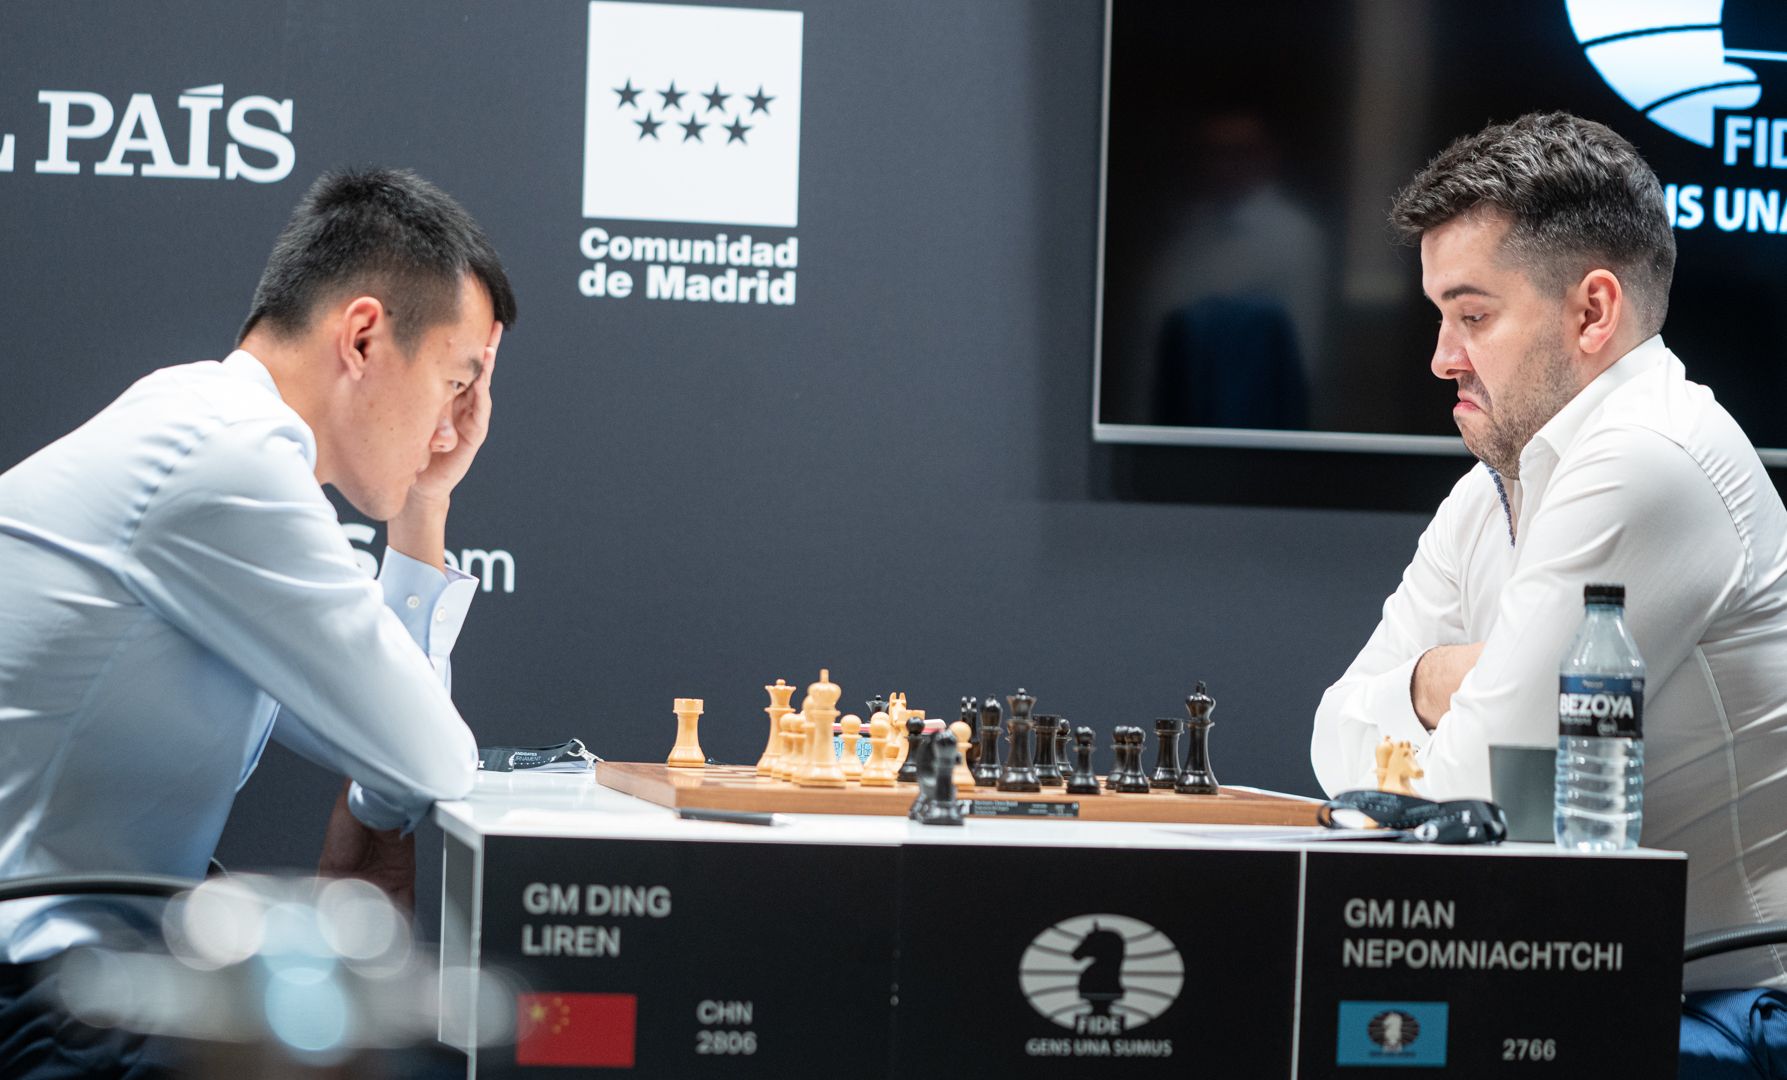 Chess.com on X: The FIDE Grand Prix starts Friday w/@GMHikaru,  @LevAronian, Ding Liren, and more! ♚ The top two finishers will qualify for  the 2022 Candidates Tournament. Who do you think is